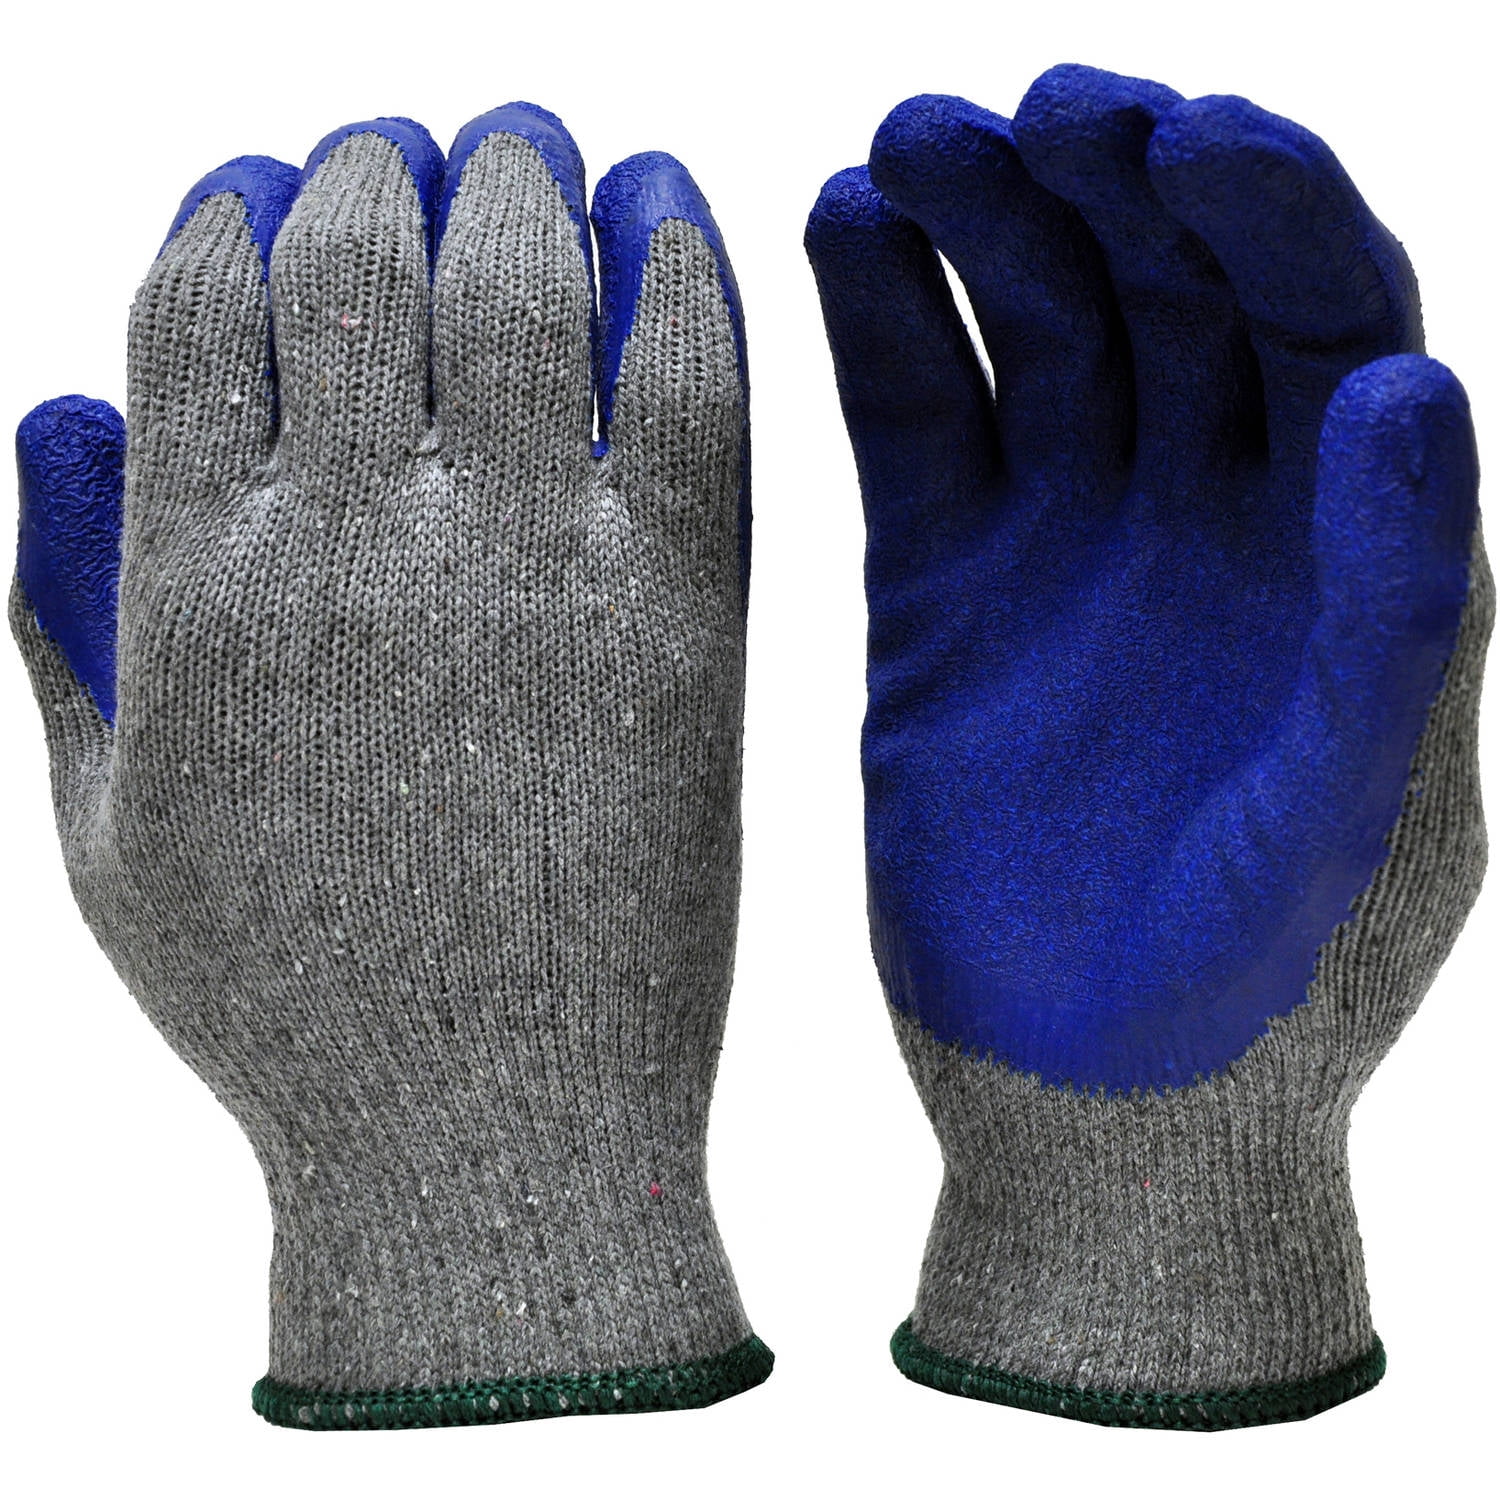 ndschuh mit Nitril-Beschichtung KORO-NIT BLUE Gr.10 data-mtsrclang=en-US href=# onclick=return false; 							show original title Details about   12 Pairs of Nylon Knitted Glove with Nitrile Coating Koro-Nit Blue Size 10 